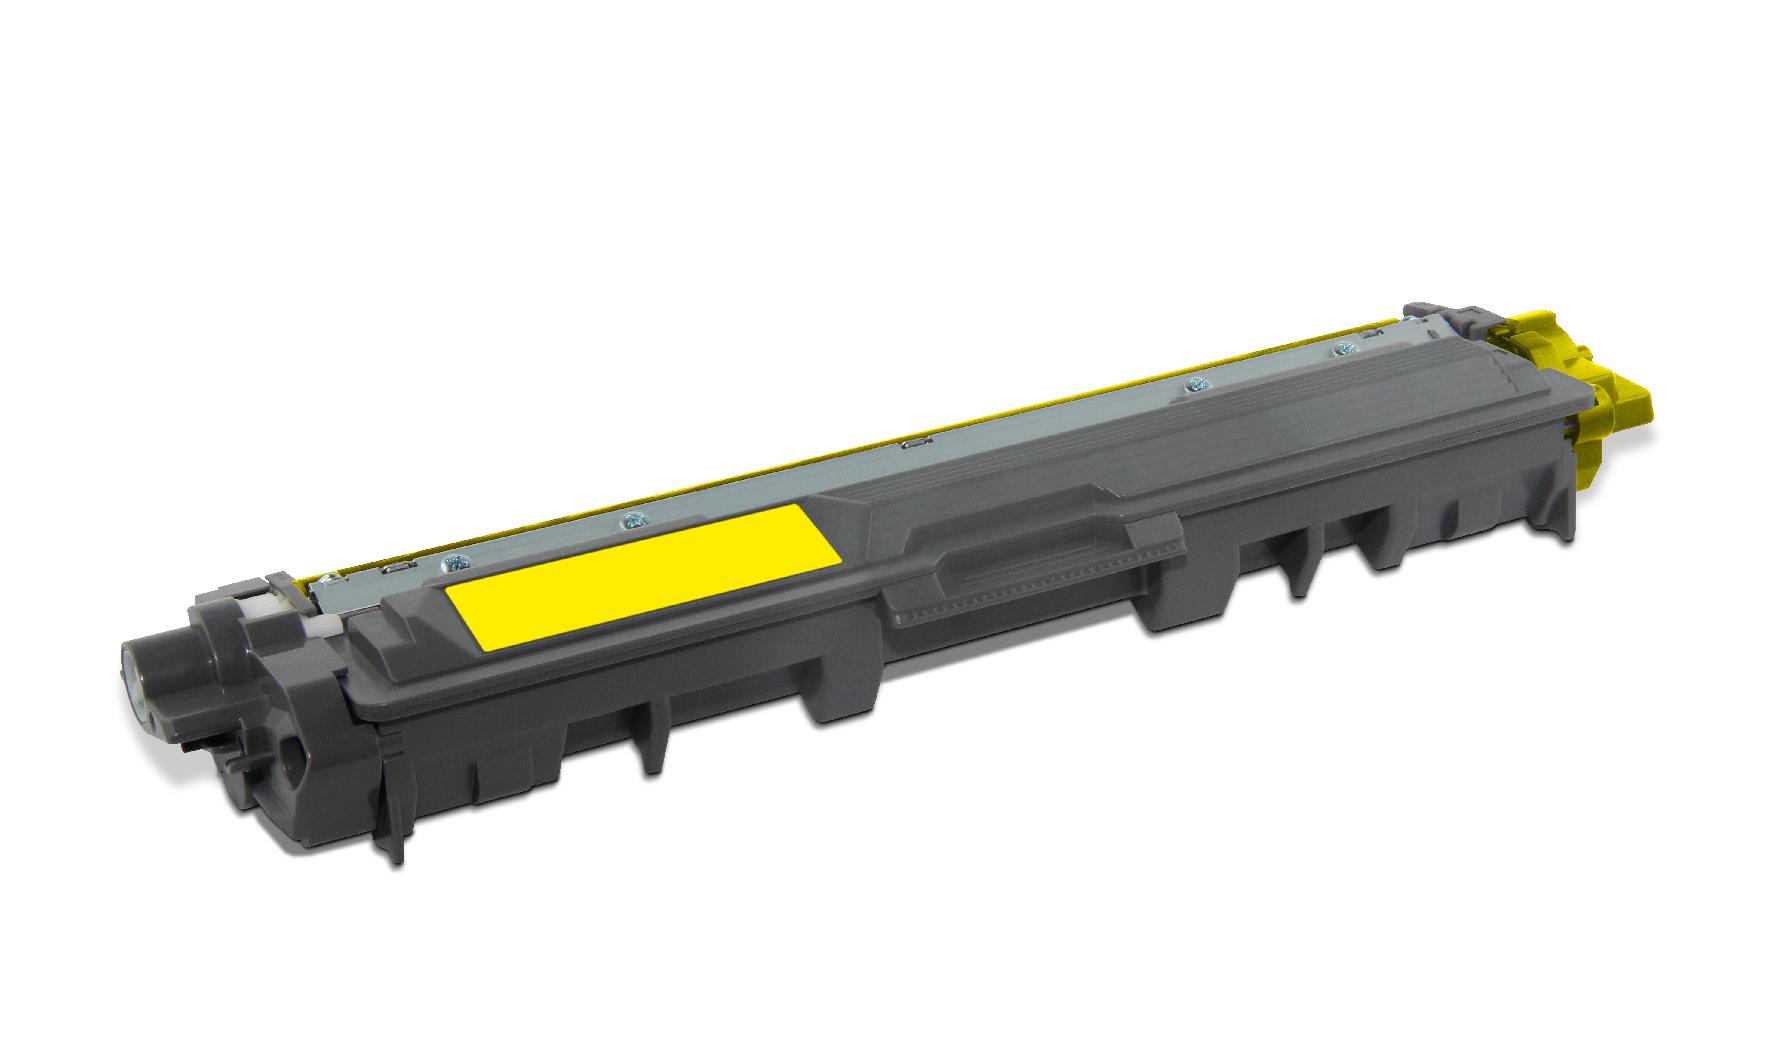 Toner Brother HL 3142/ 3152/ 3172 CDW/ DCP 9022/ 9017/ MFC 9142/ 9332/ 9342 CDW   yellow